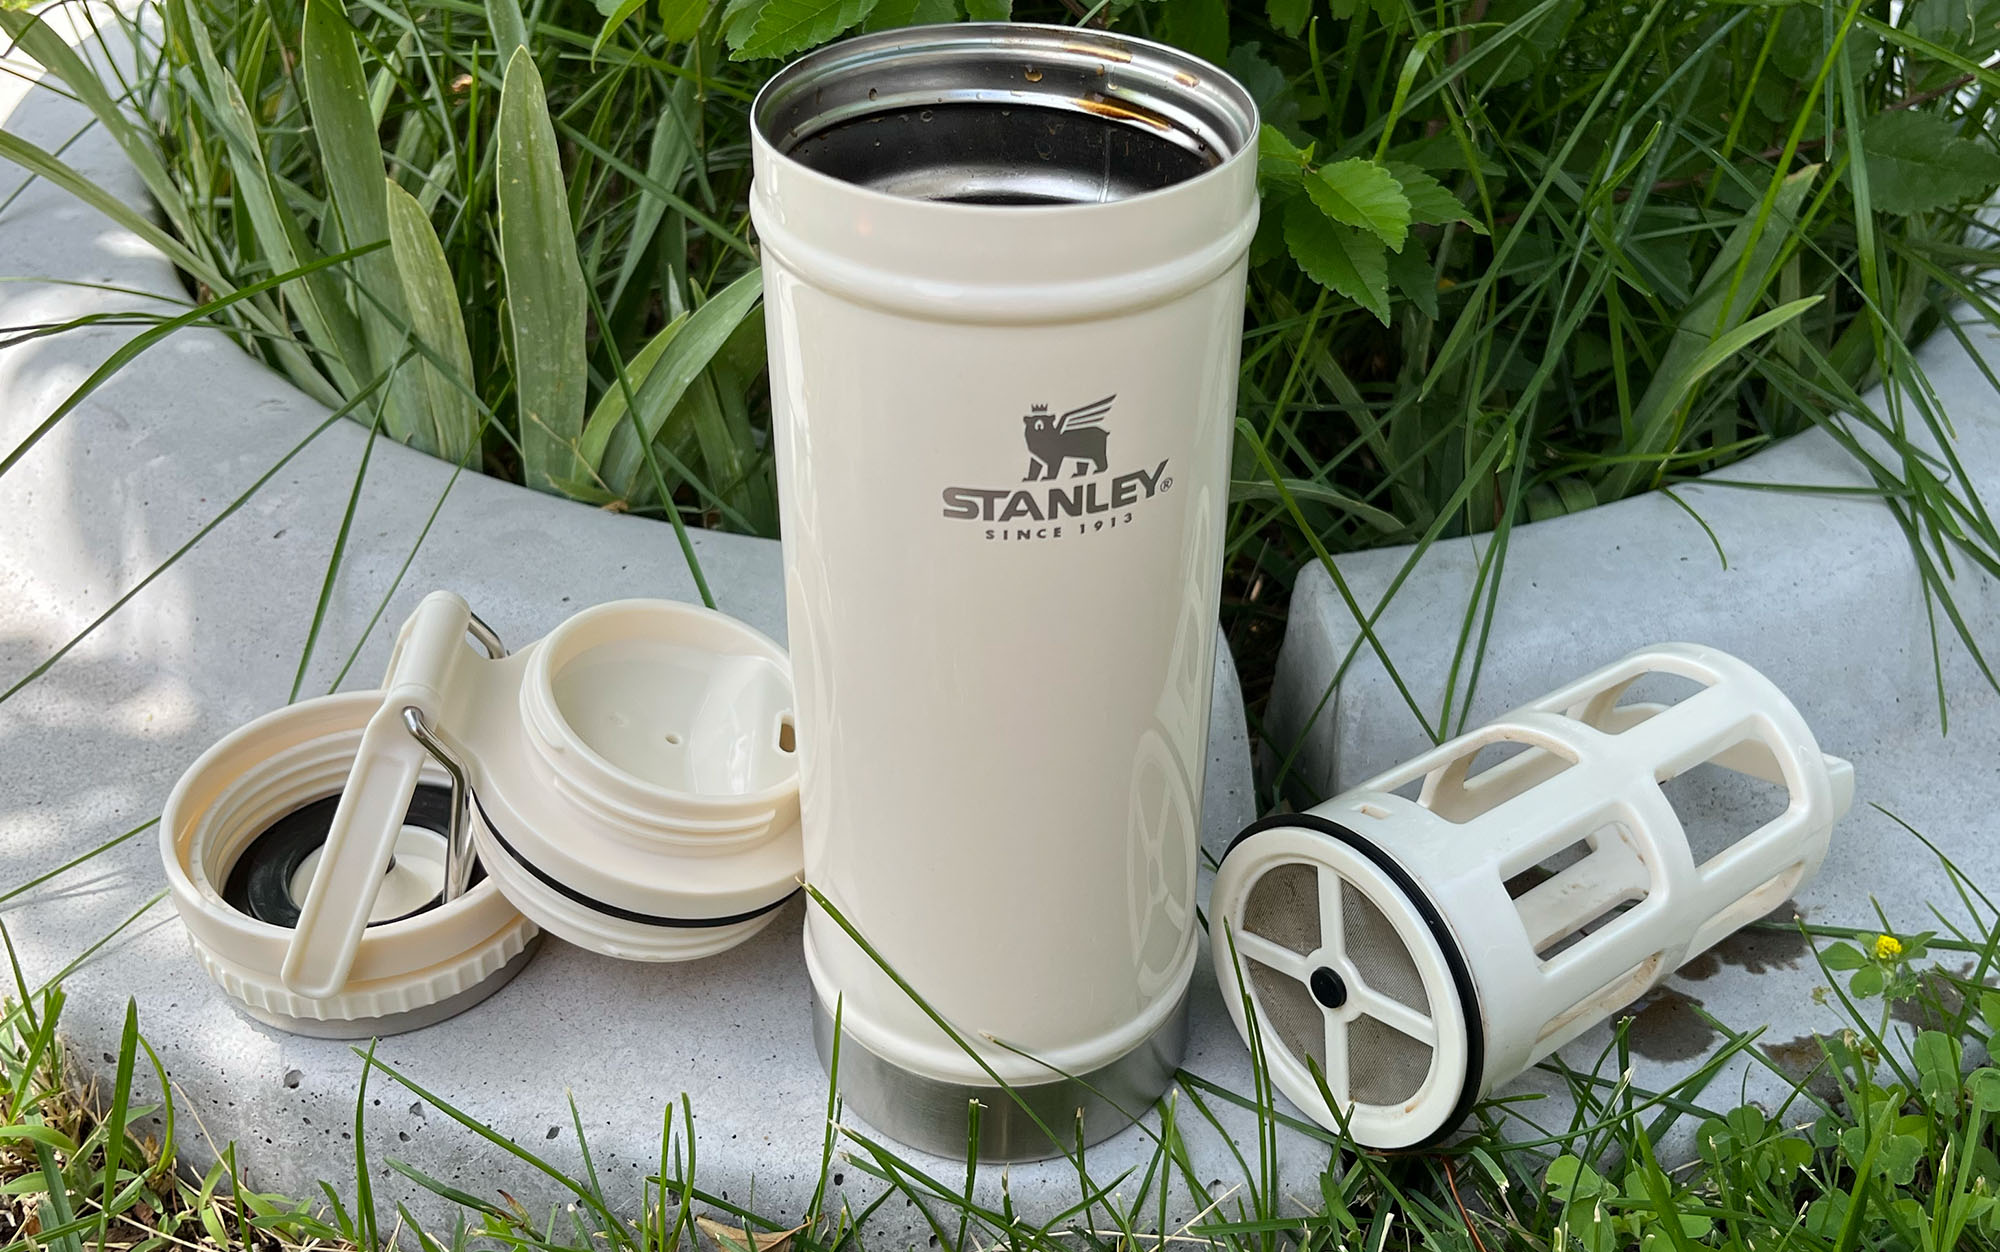 The Stanley French Press Travel Mug is easy to use.